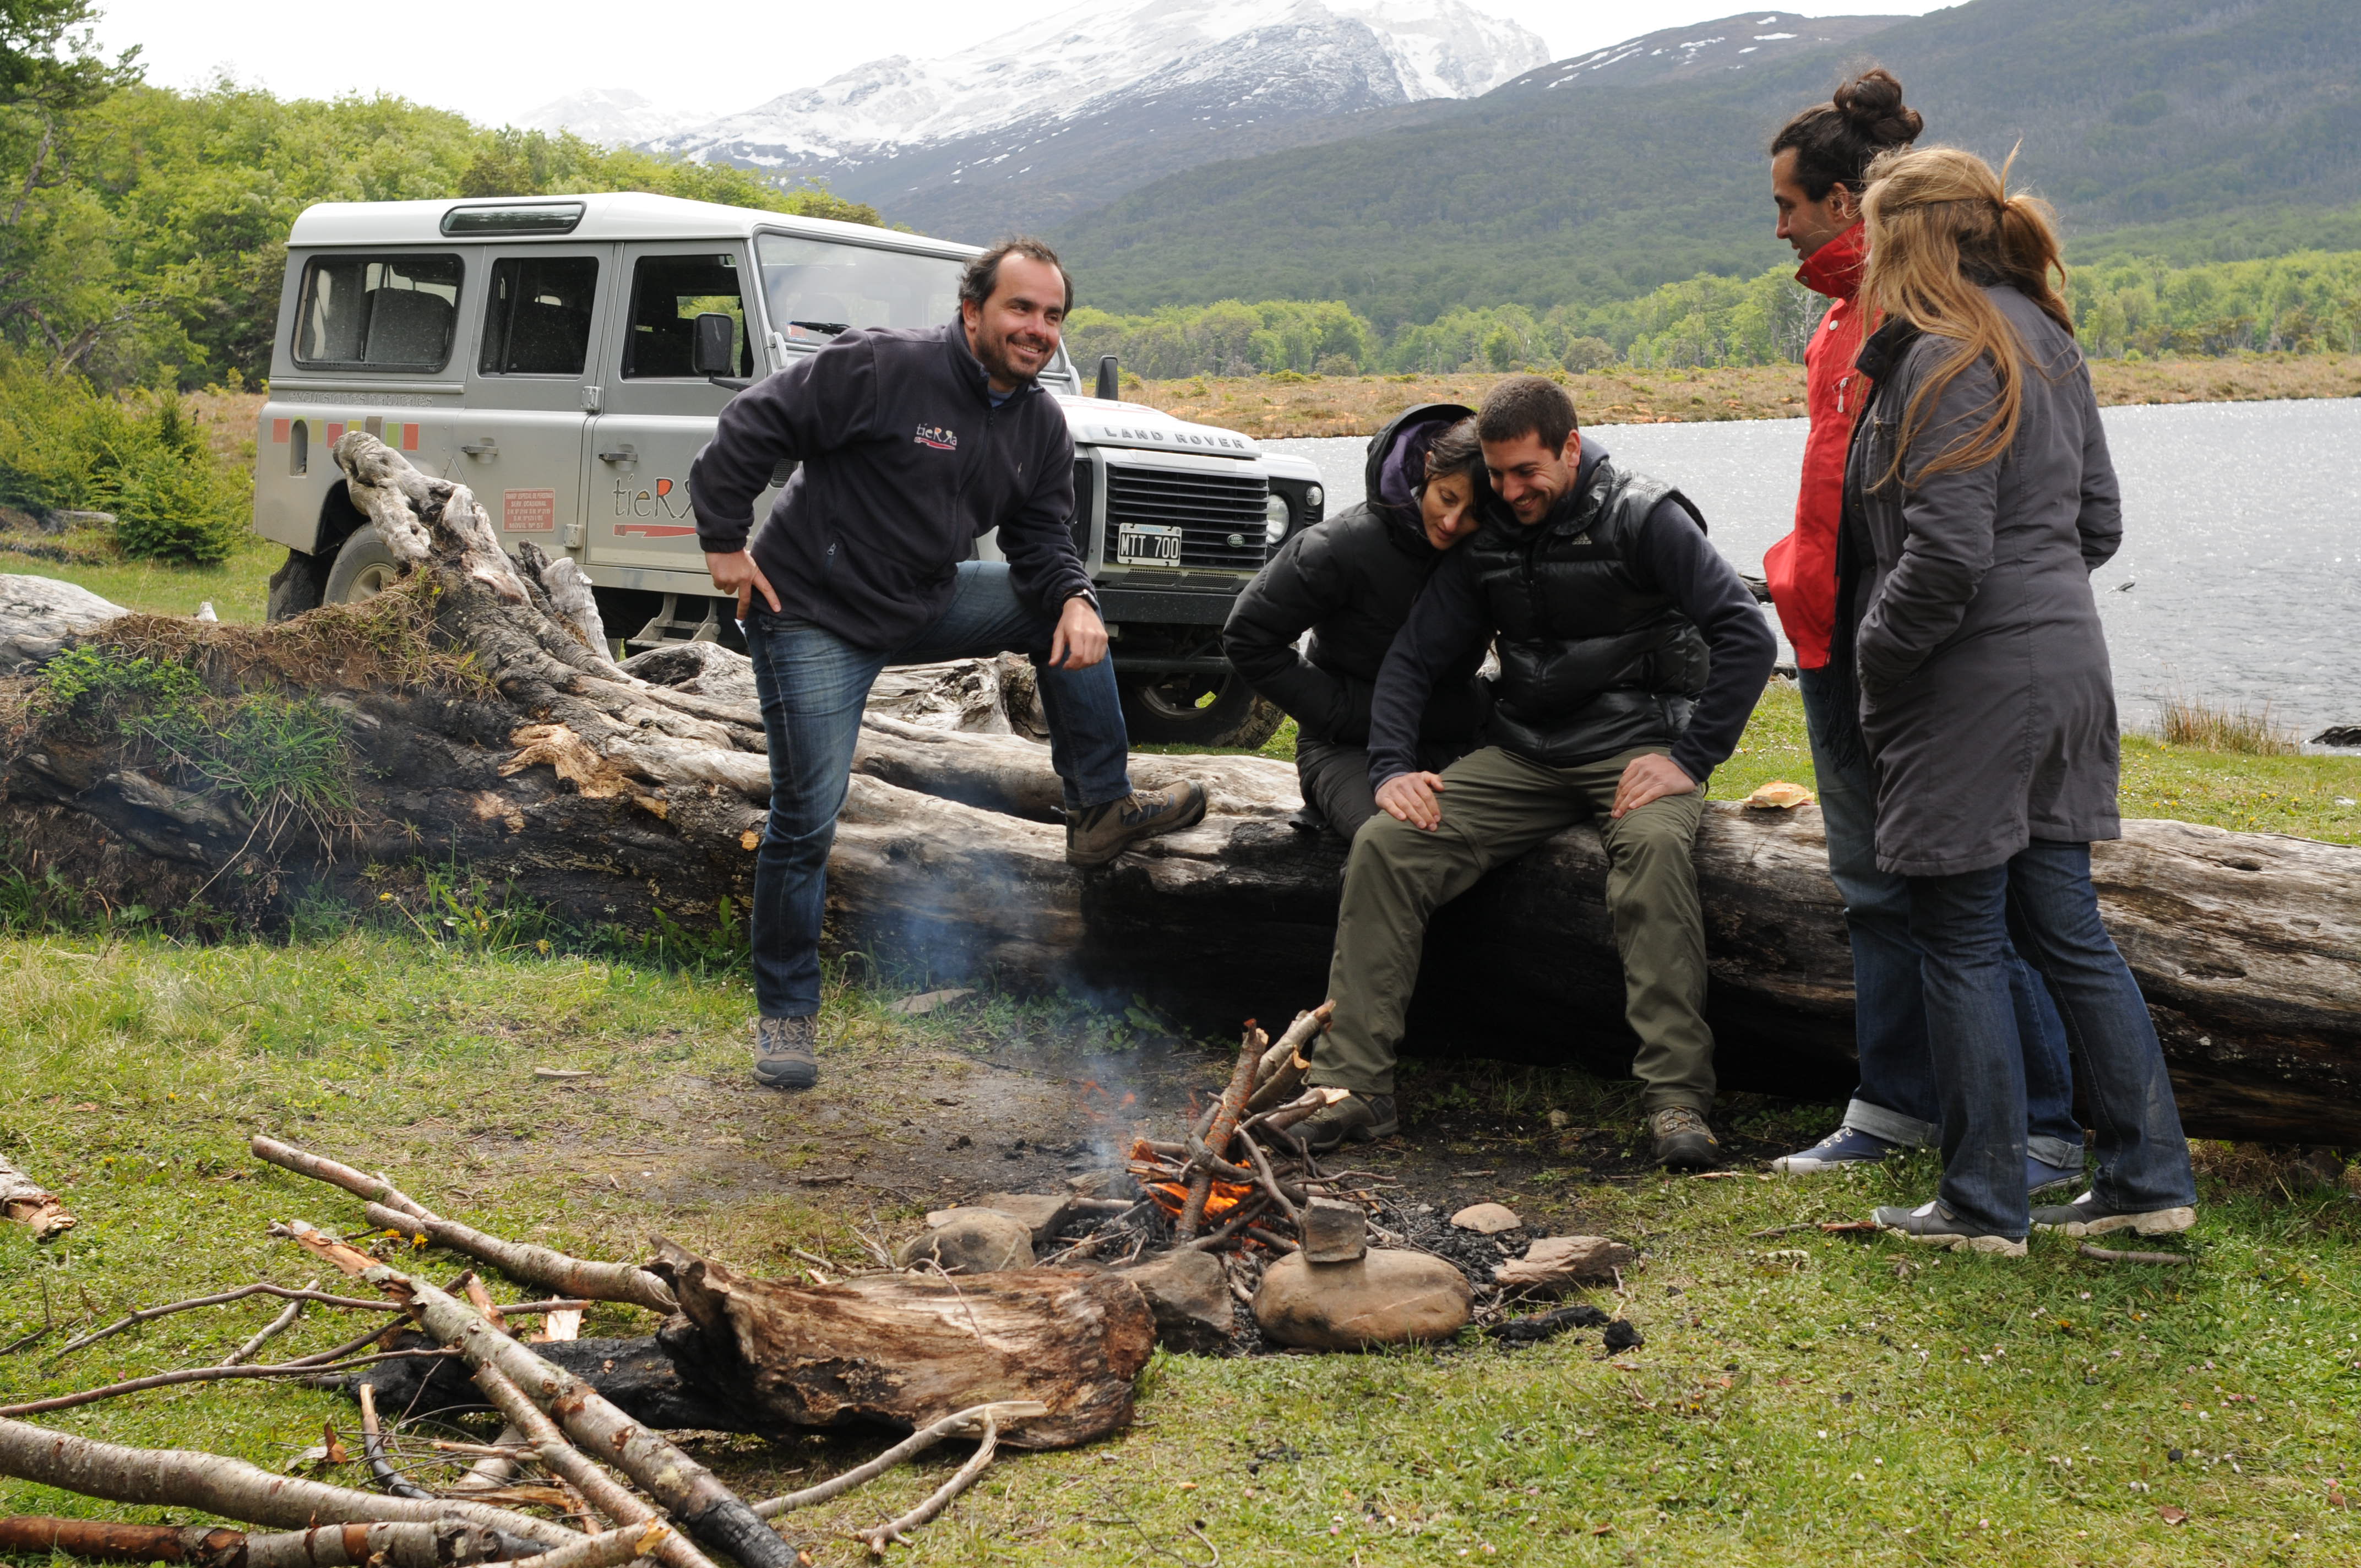 Sharing some moments around an open fire, in the Península Mitre